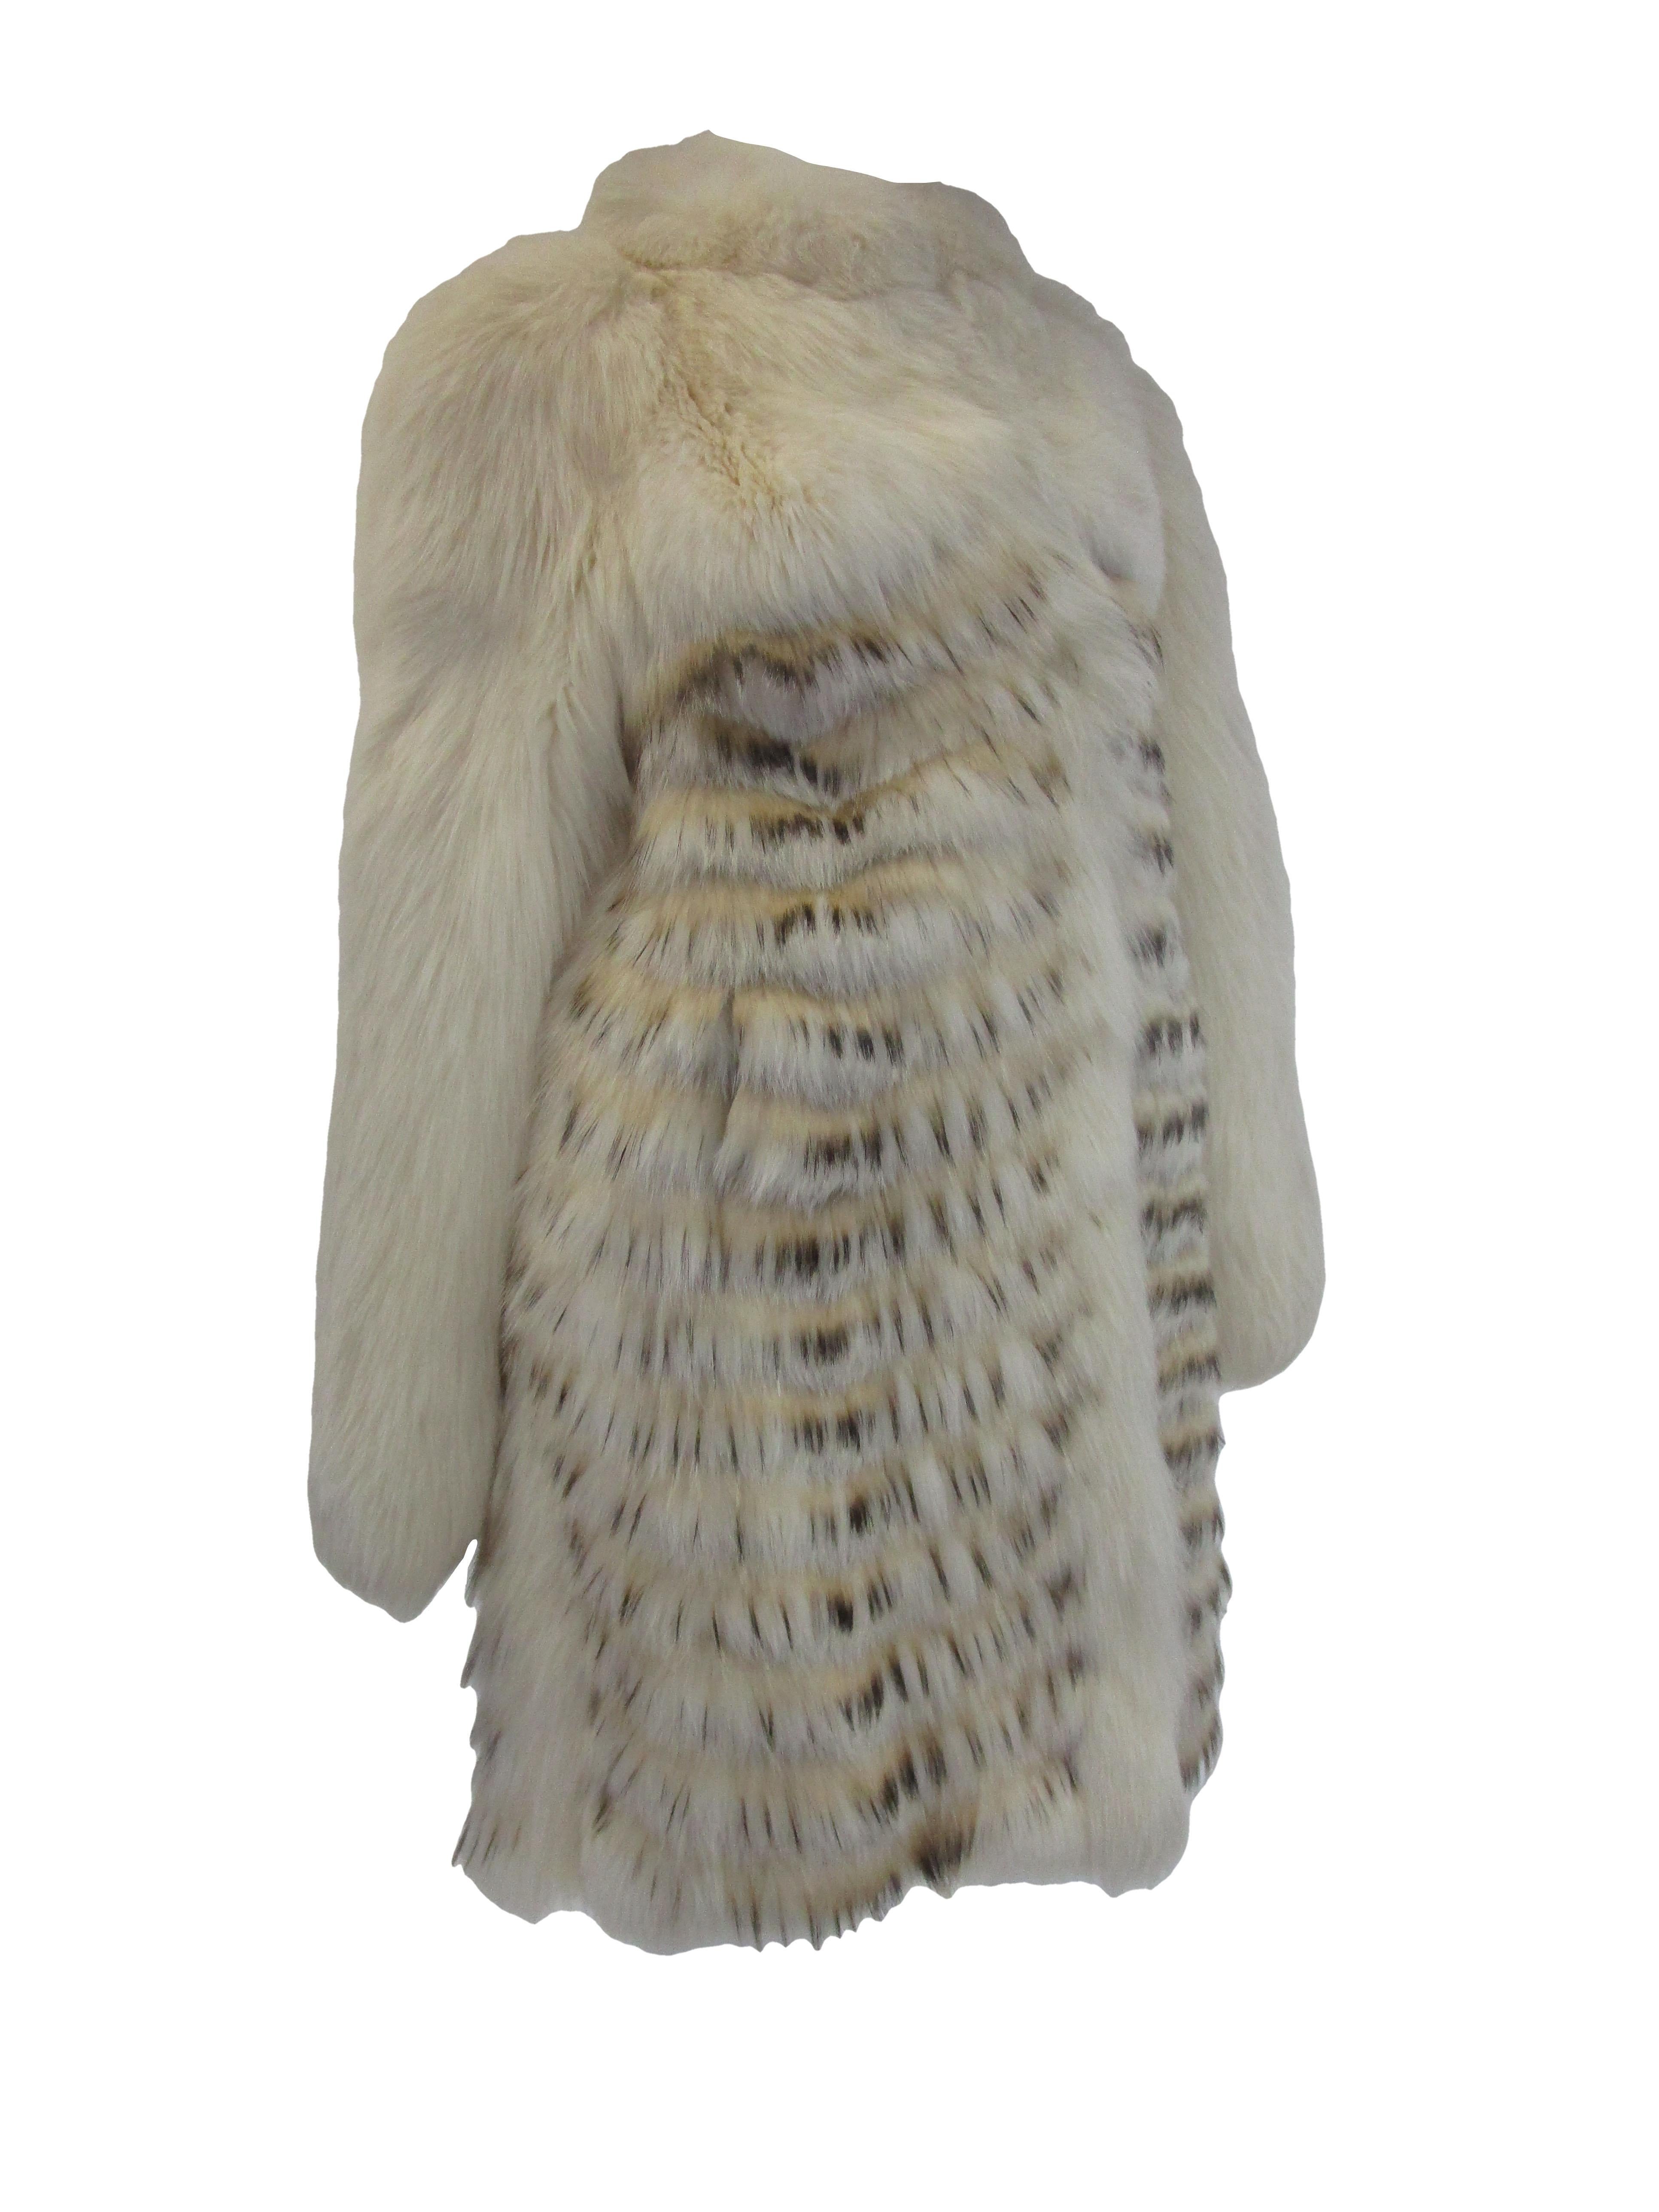  
make a statement this winter with a ravishing fur coat from Bill Blass Paris! Perfect for an evening event or just casually strutting your best look off the slopes! The fur billows around the neck with hues of brown, cream and grey cascading down